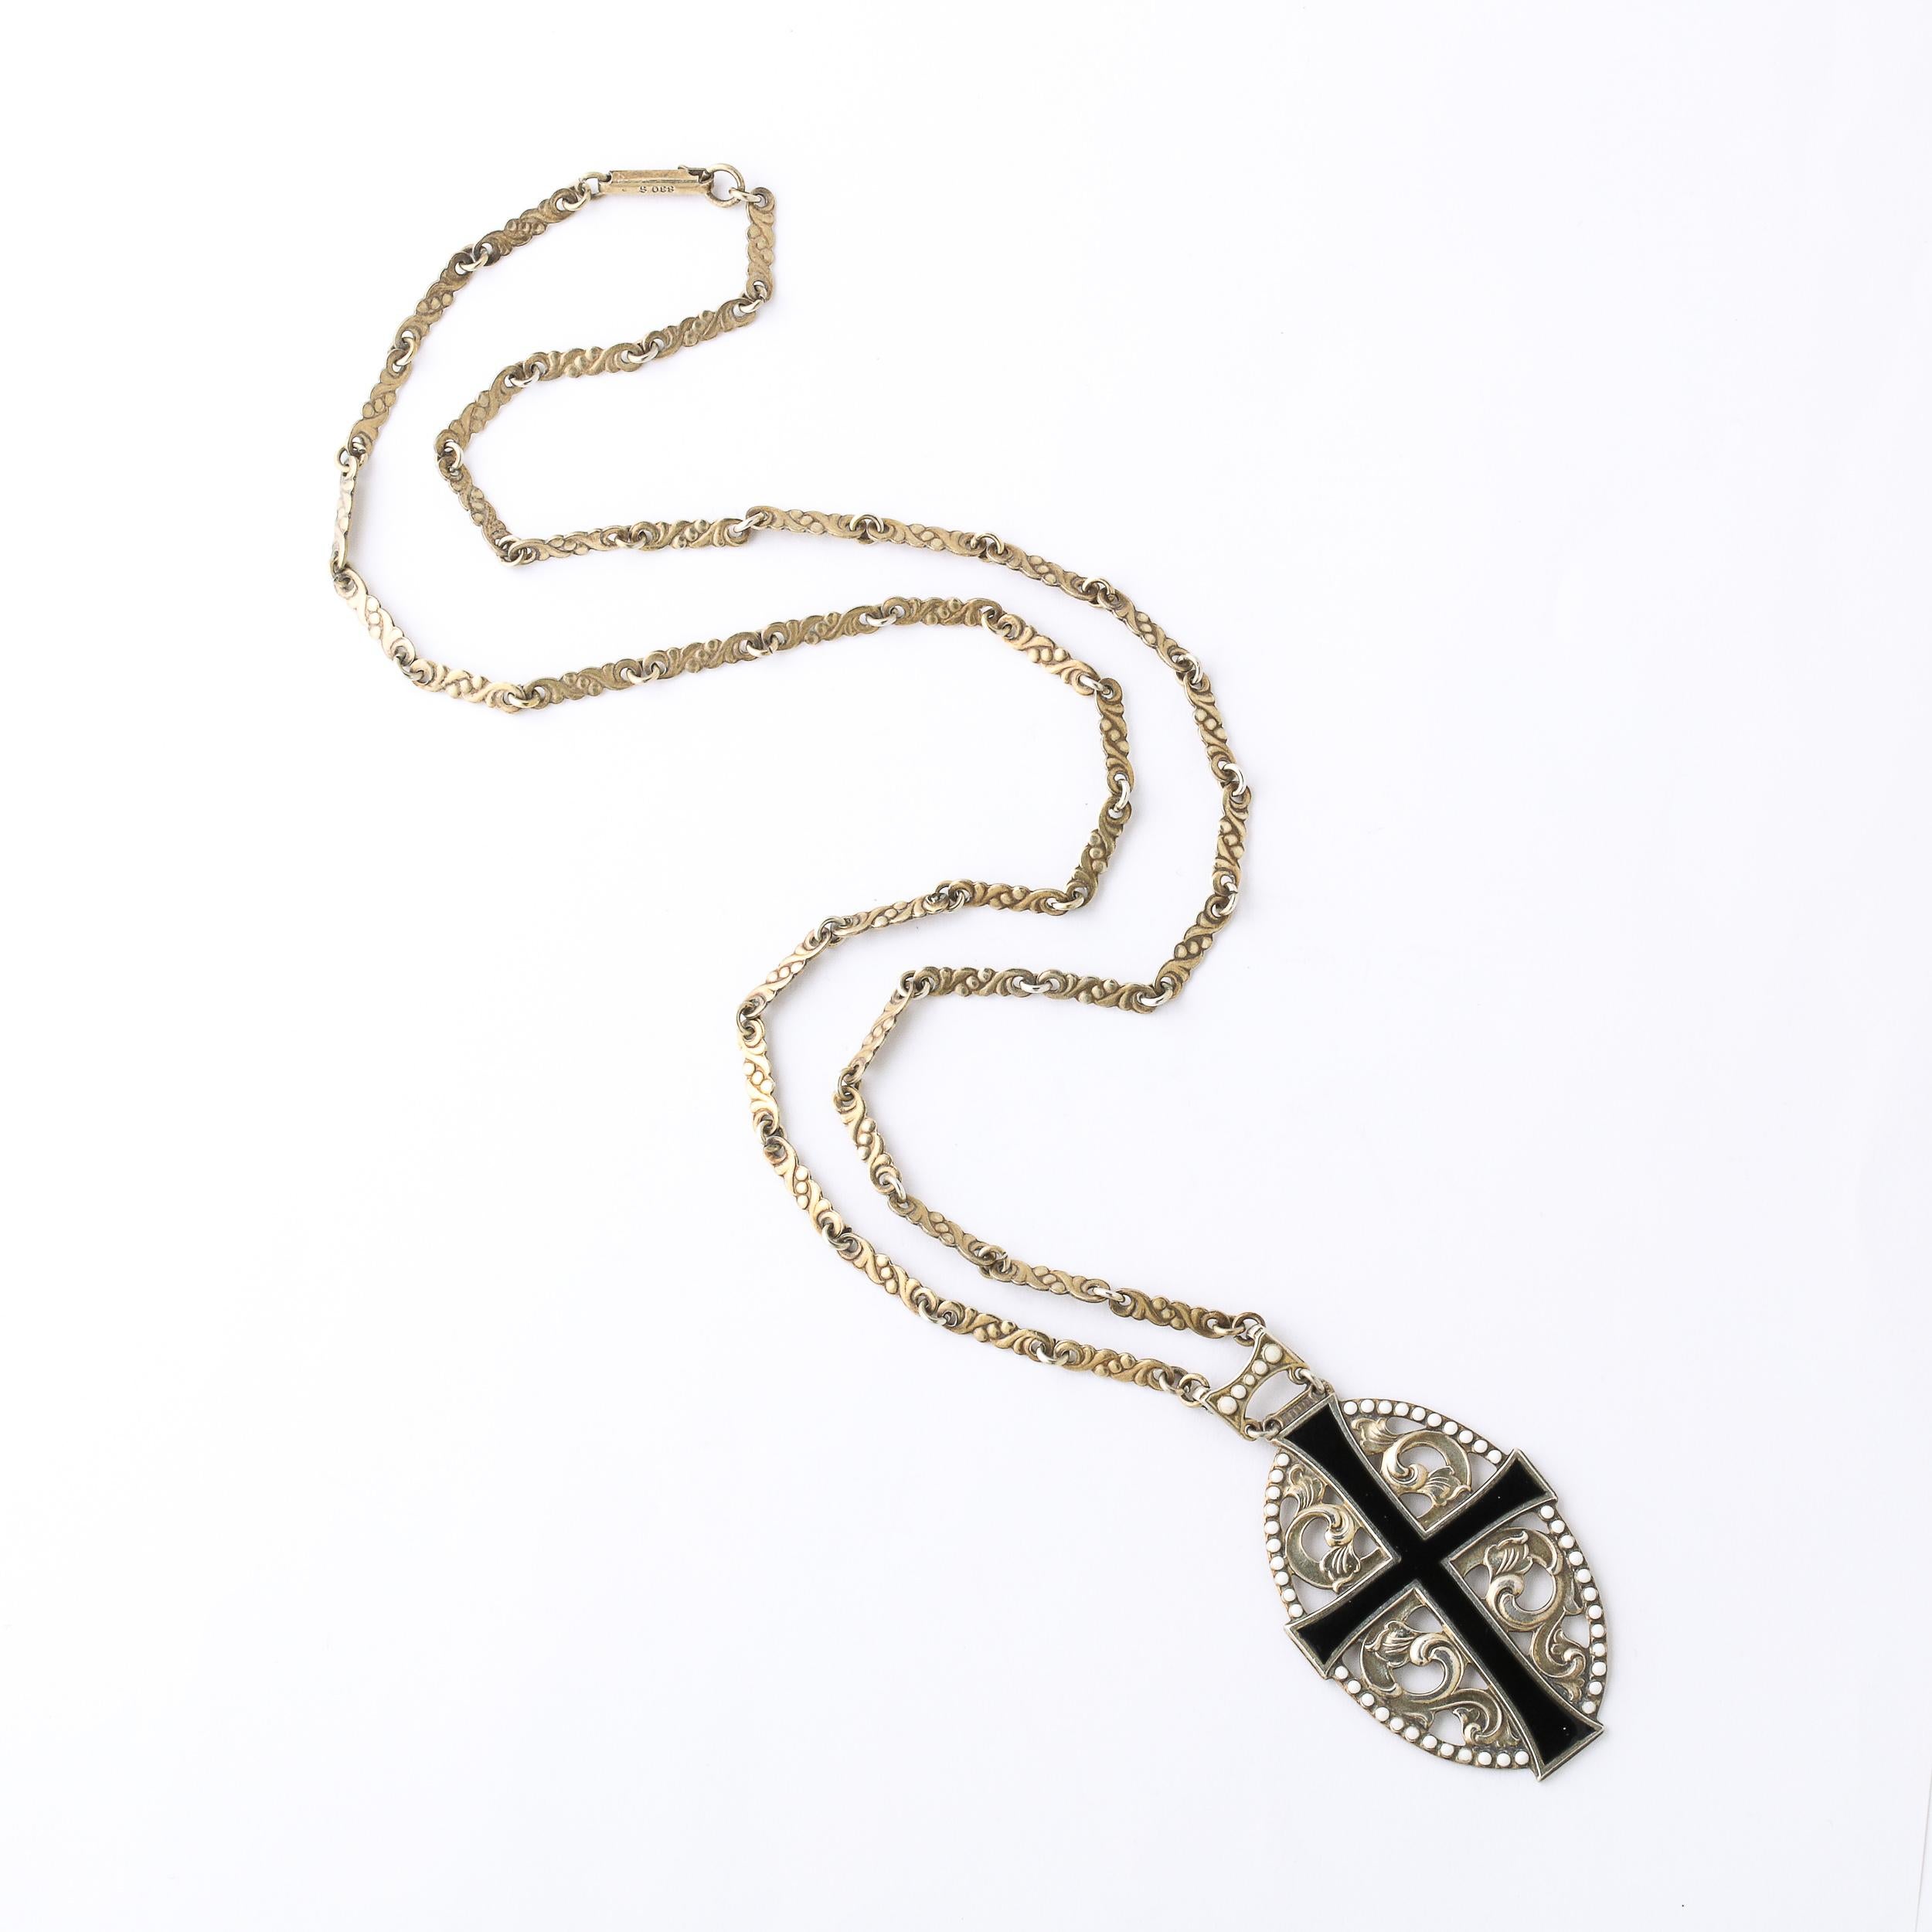 Antique Gilt Silver & Enamel Decorated Openwork Cross Pendant Necklace In Good Condition For Sale In New York, NY